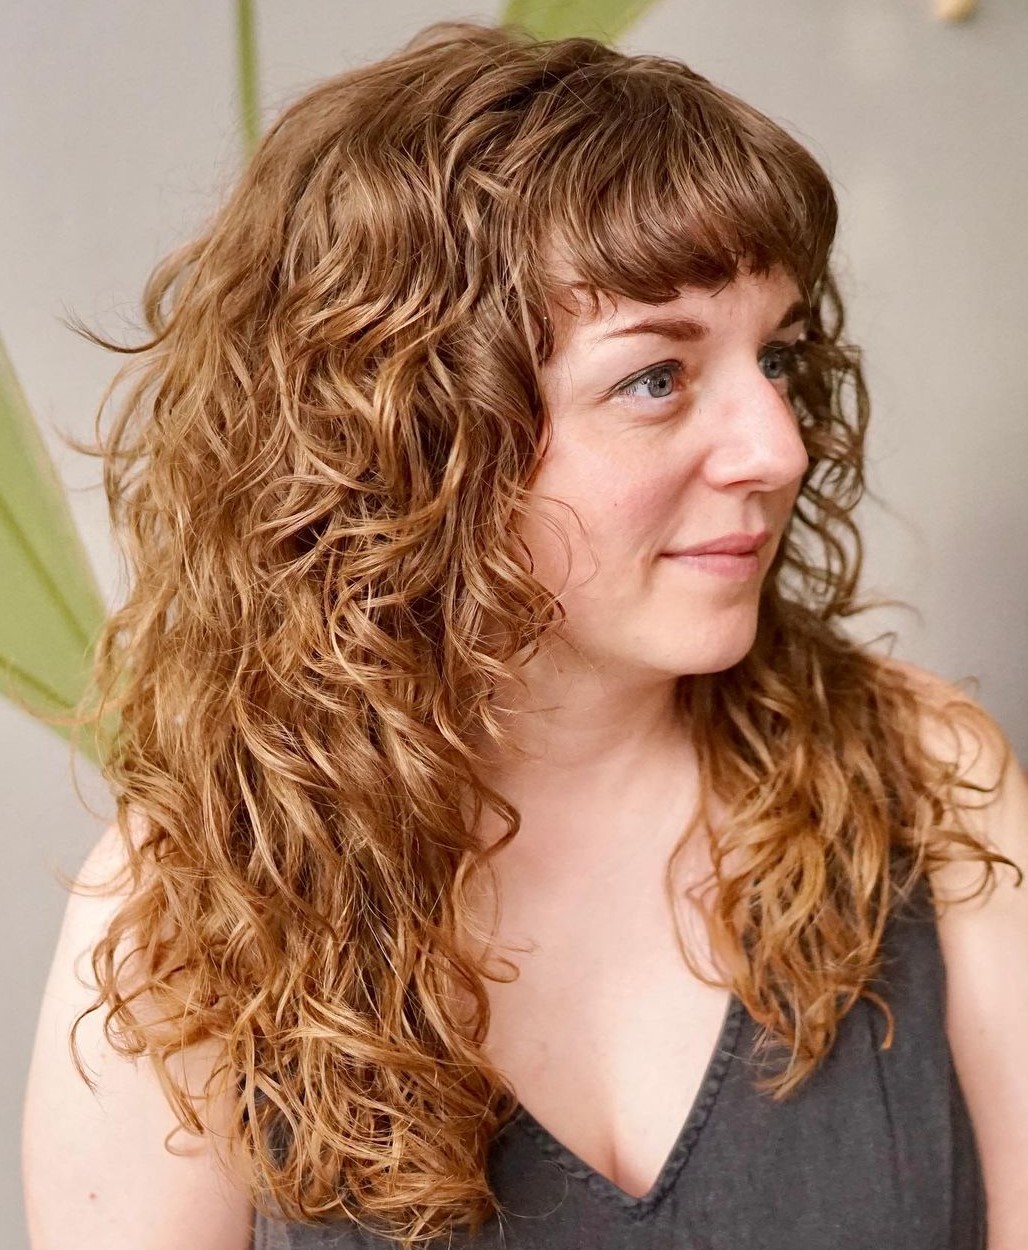 Long Curly Hair with Short Bangs